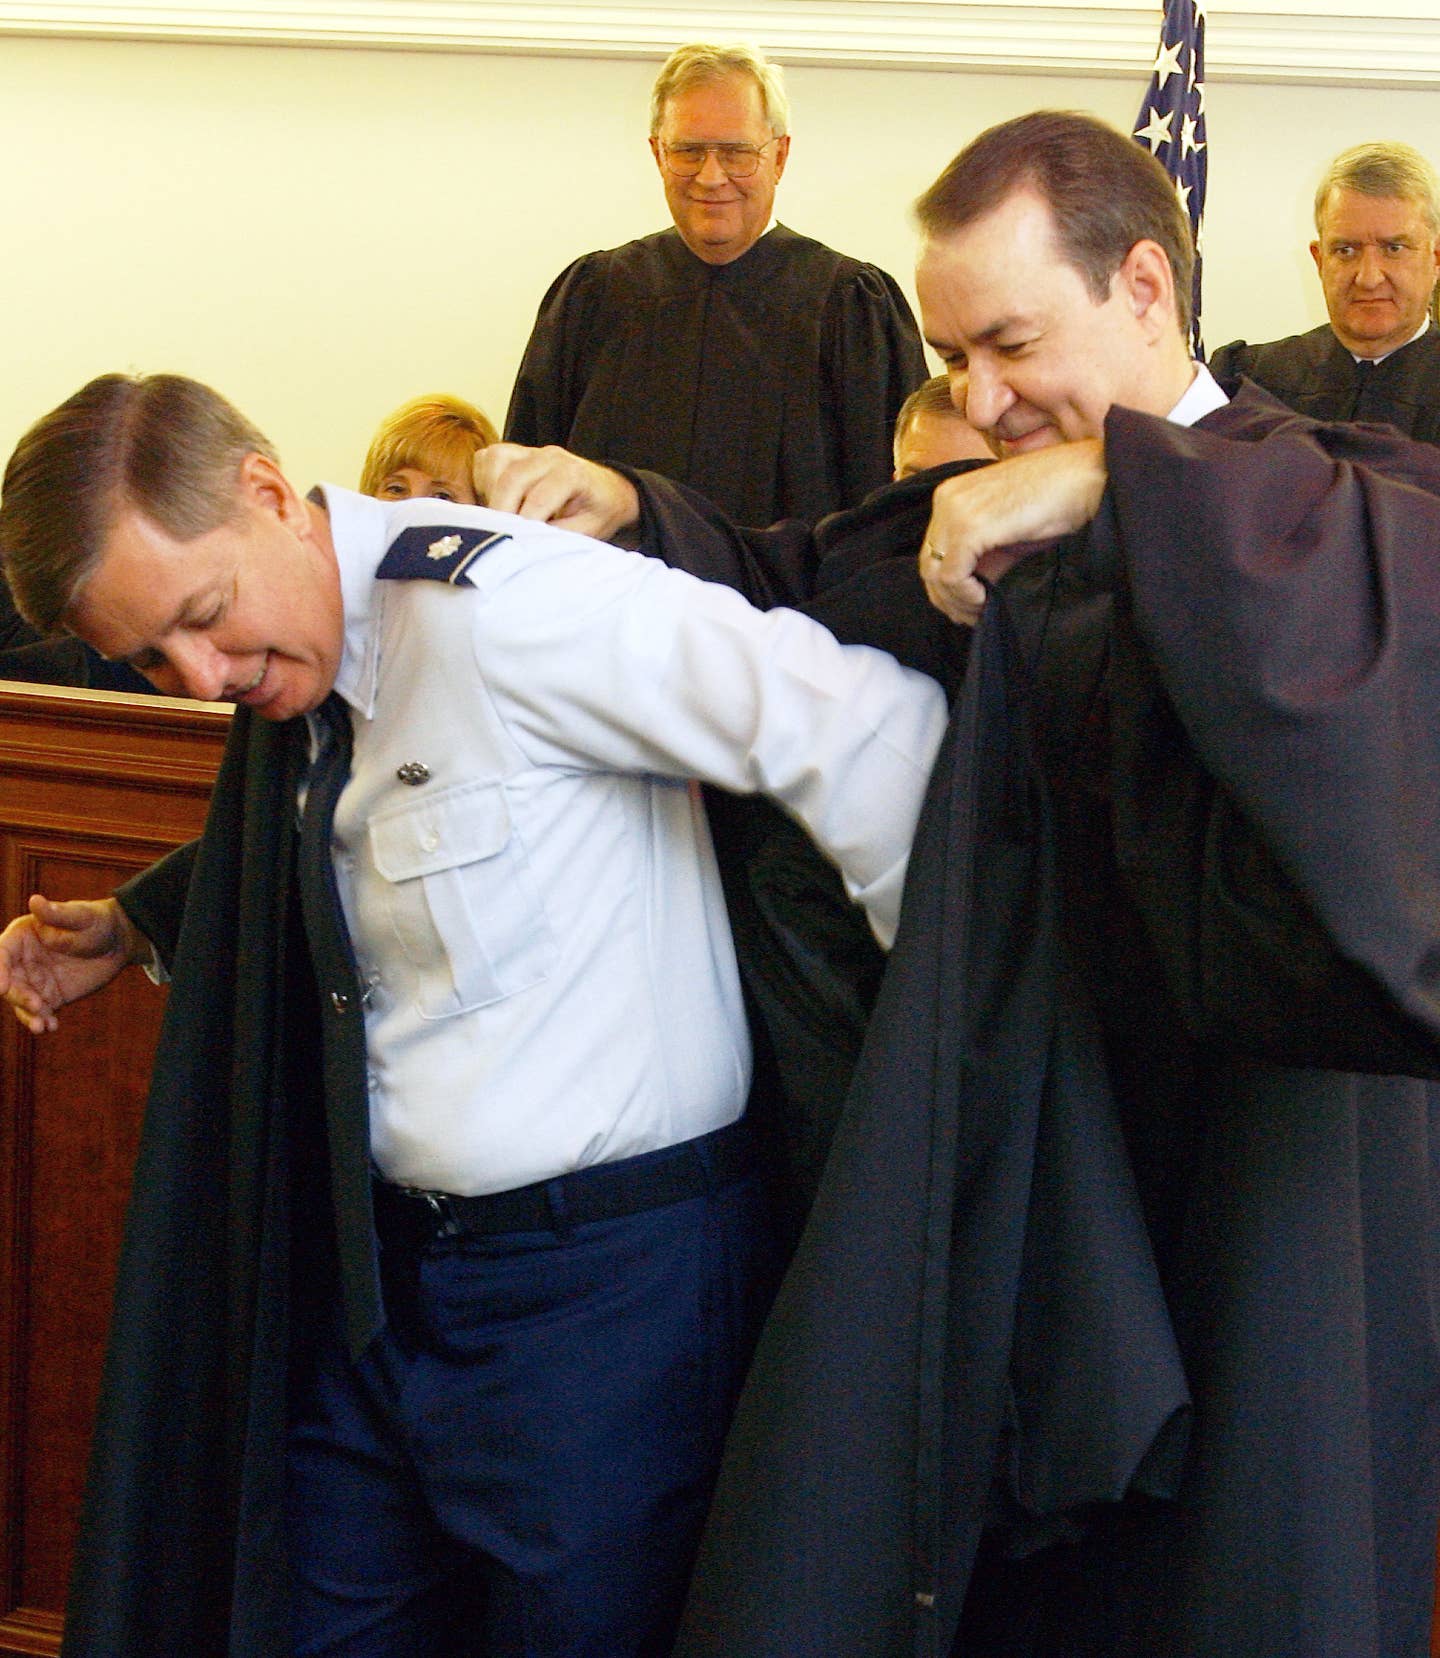 Col. James Van Orsdol (right) helps Lt. Col. Lindsey Graham don a judge's robe in a courtroom after Graham was sworn in as a new judge for the Air Force Court of Criminal Appeals. (U.S. Air Force photo by Staff Sgt. Amber K. Whittington)